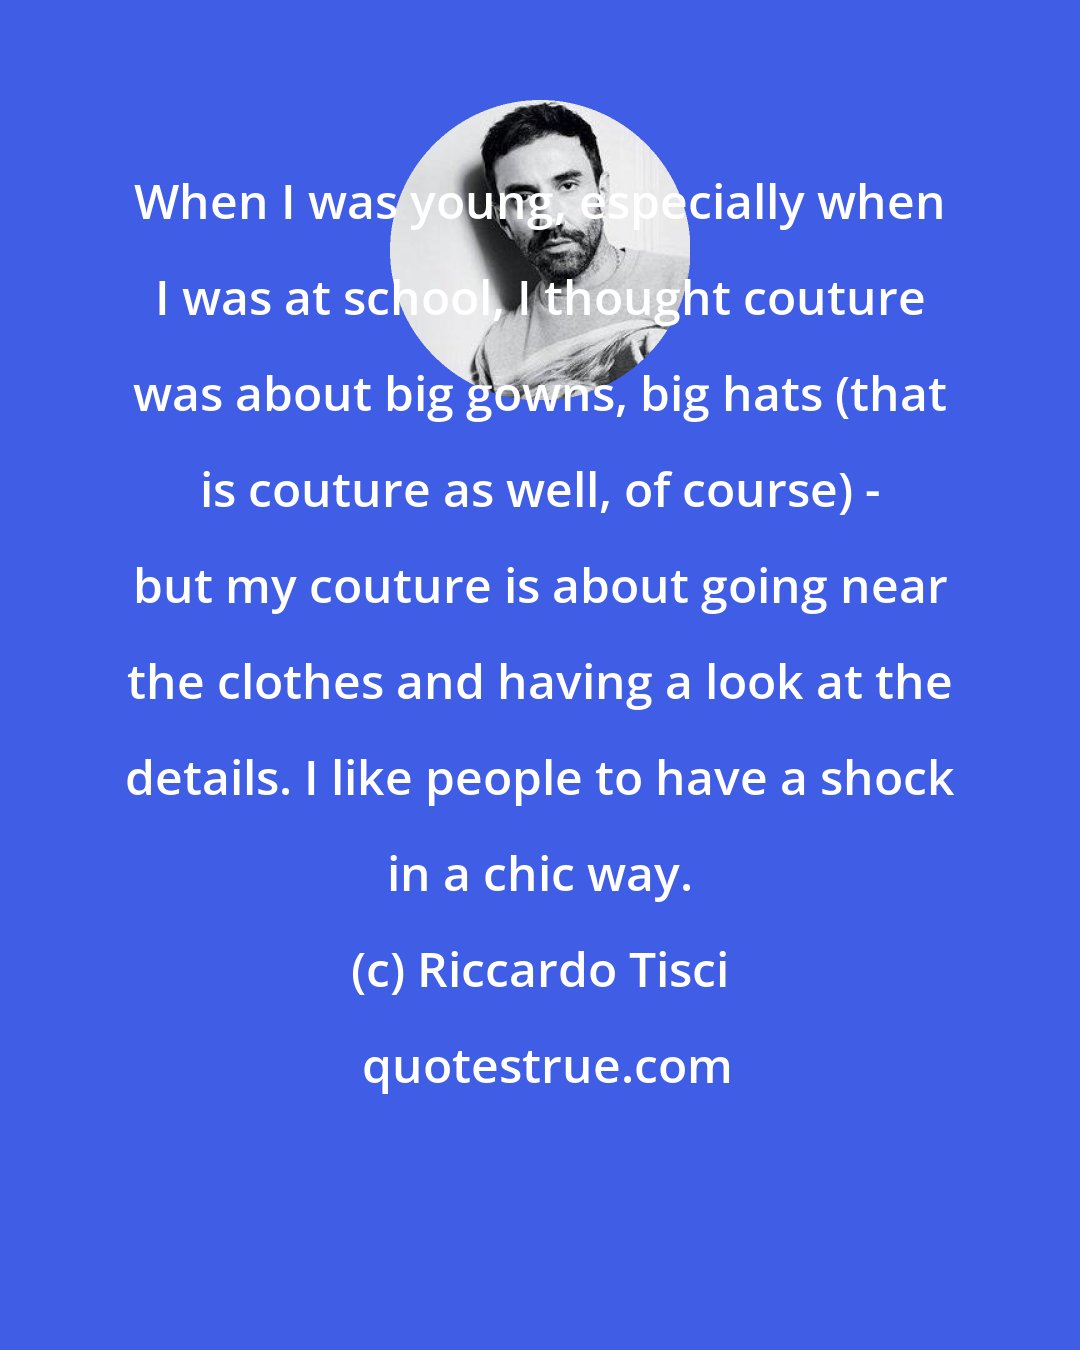 Riccardo Tisci: When I was young, especially when I was at school, I thought couture was about big gowns, big hats (that is couture as well, of course) - but my couture is about going near the clothes and having a look at the details. I like people to have a shock in a chic way.